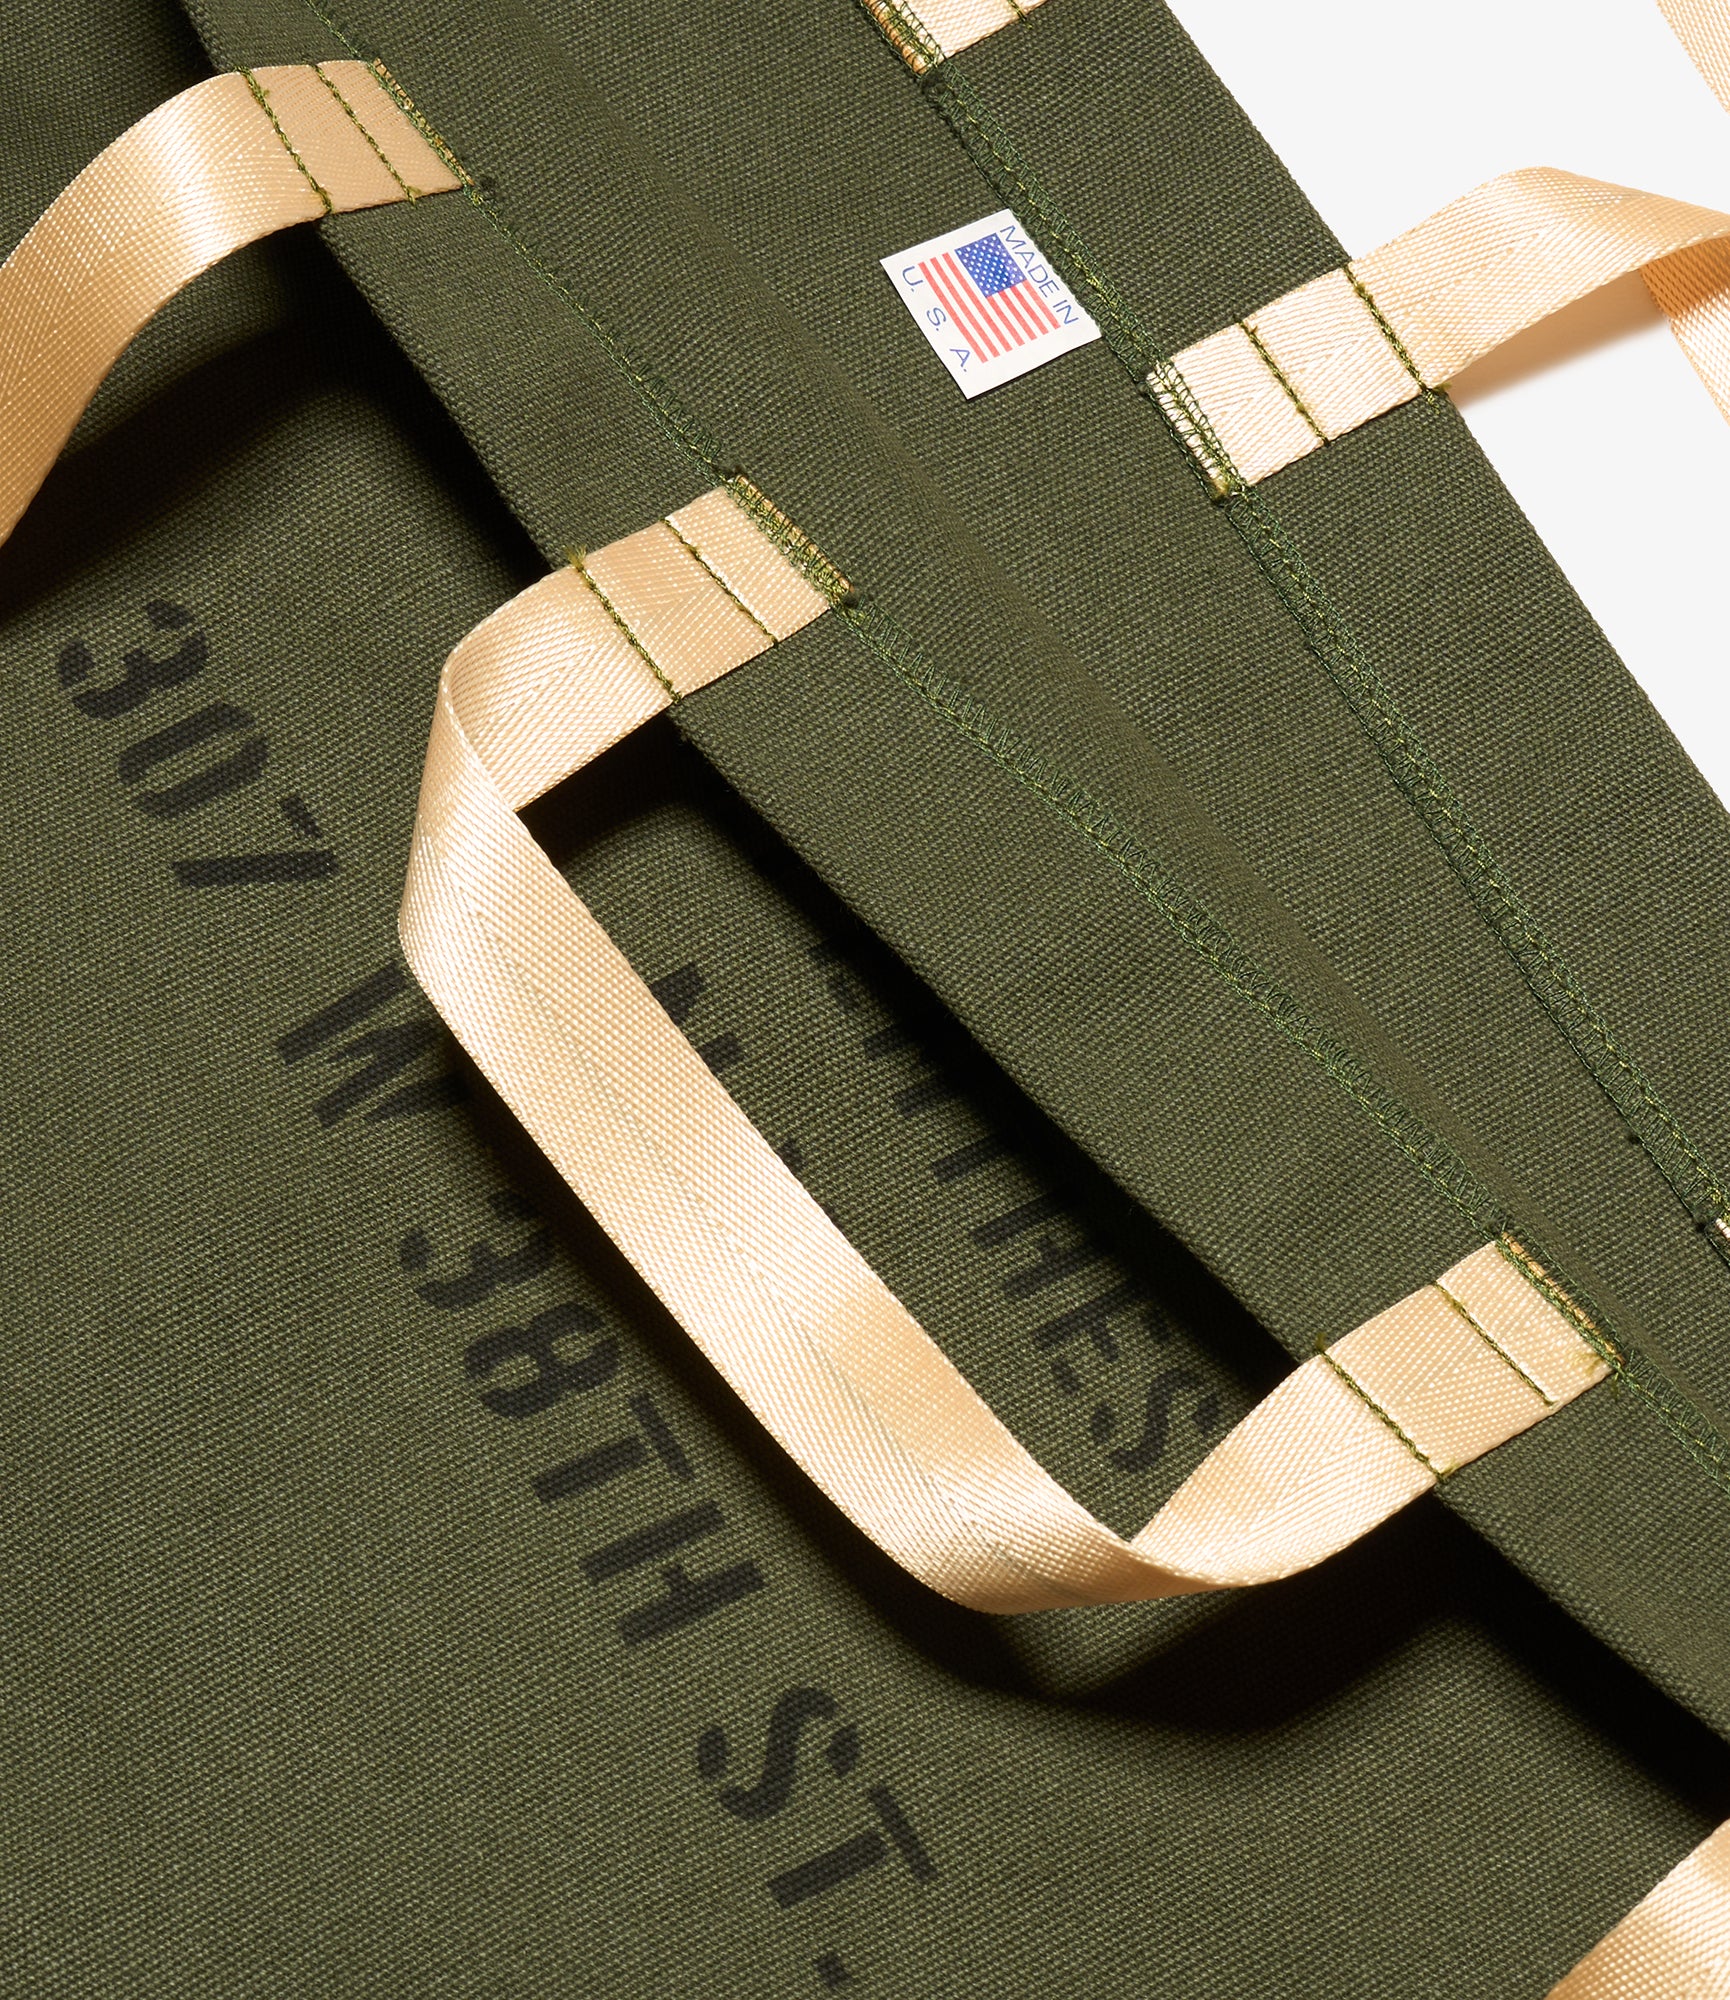 NNY Canvas Tote Bag - Large - Olive - Recycled Canvas